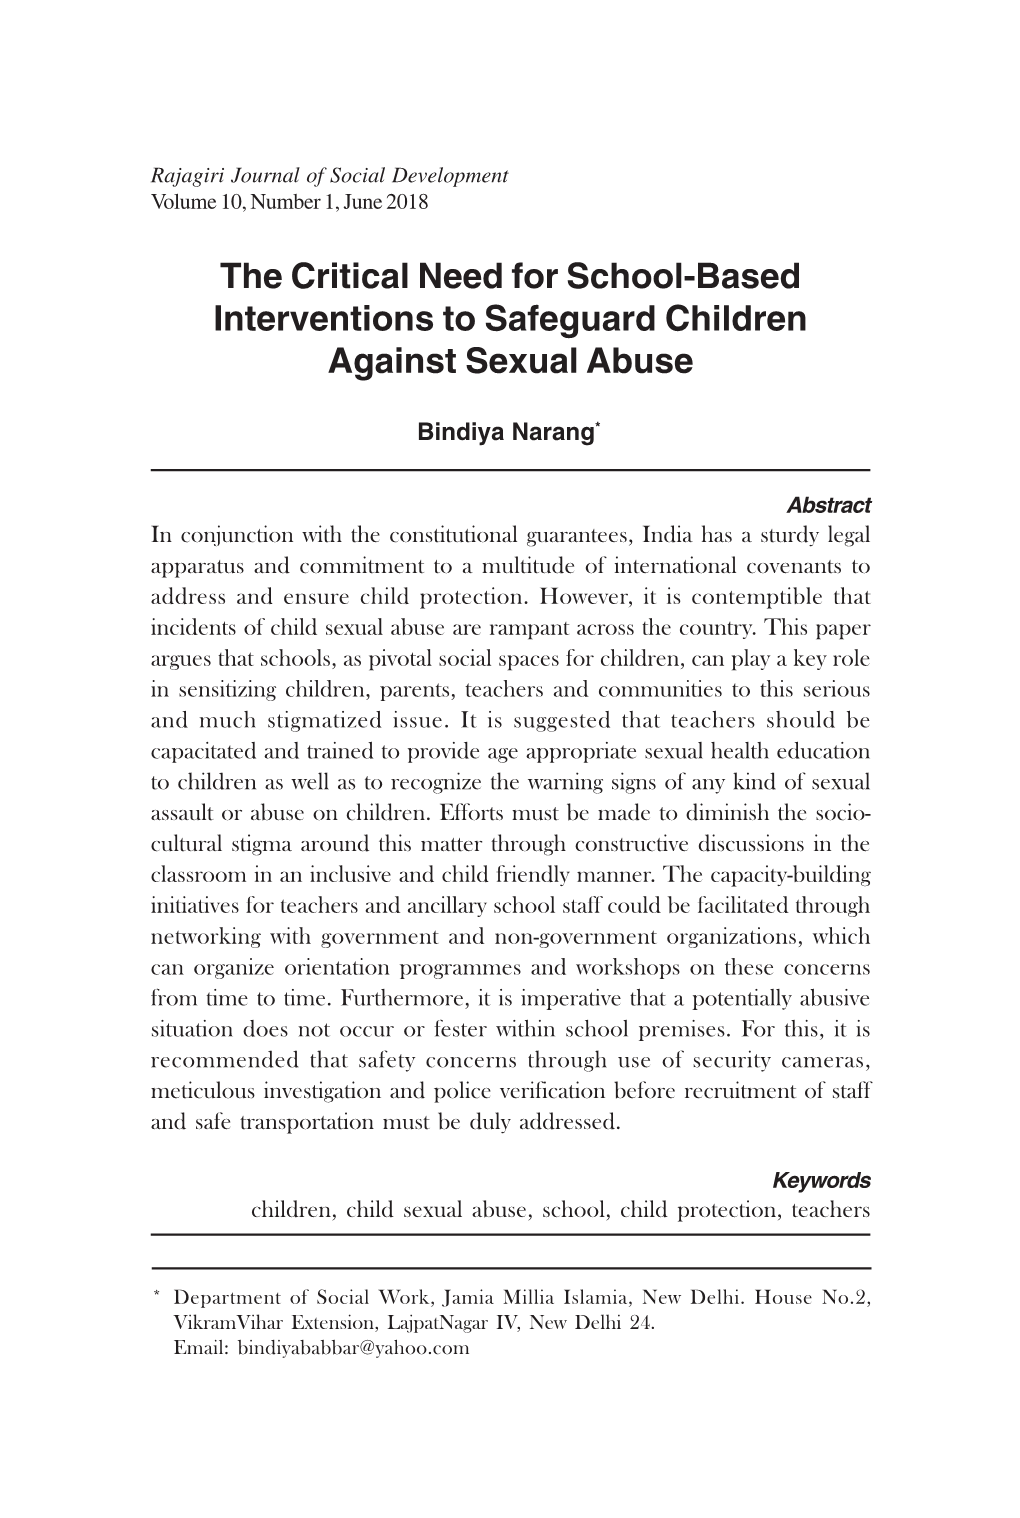 The Critical Need for School-Based Interventions to Safeguard Children Against Sexual Abuse